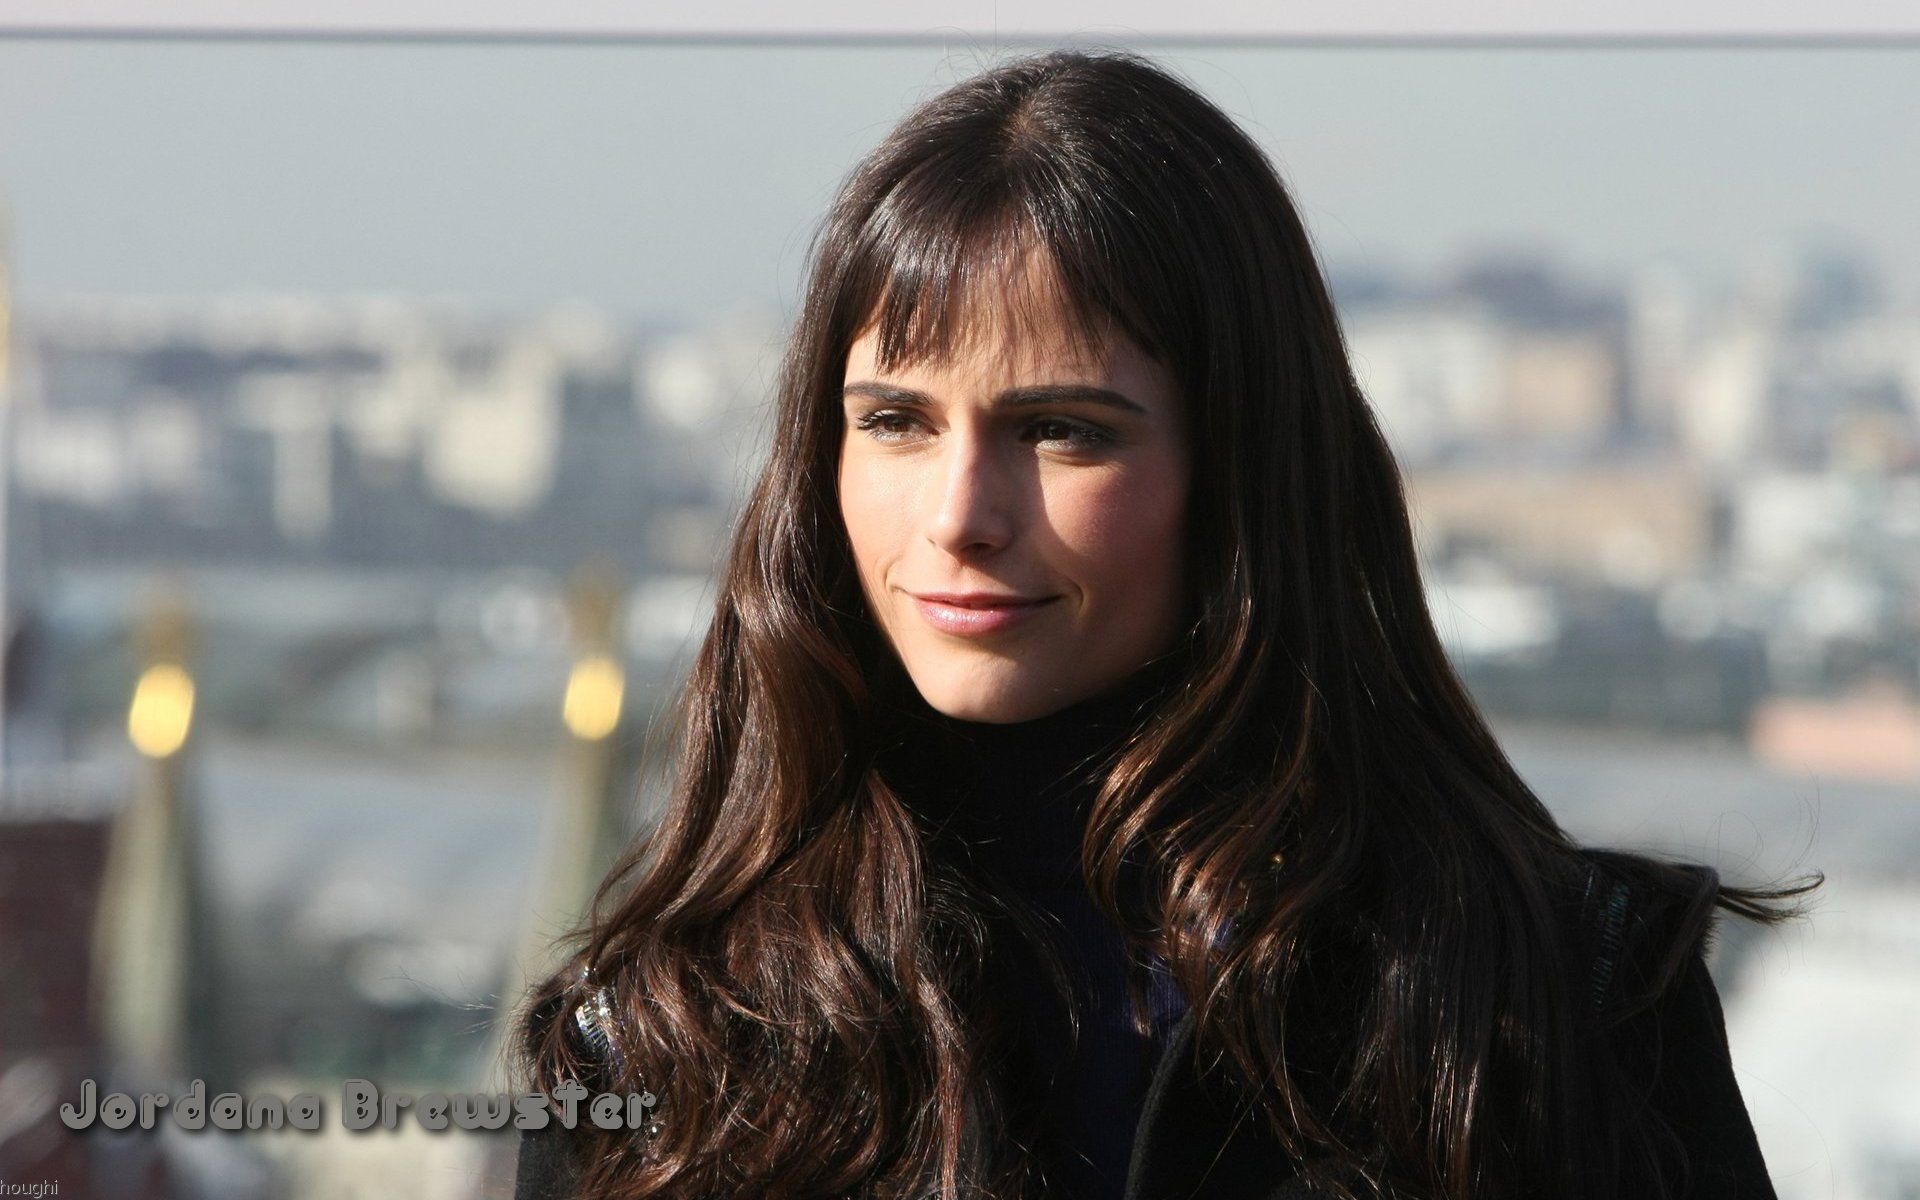 Jordana Brewster #018 - 1920x1200 Wallpapers Pictures Photos Images